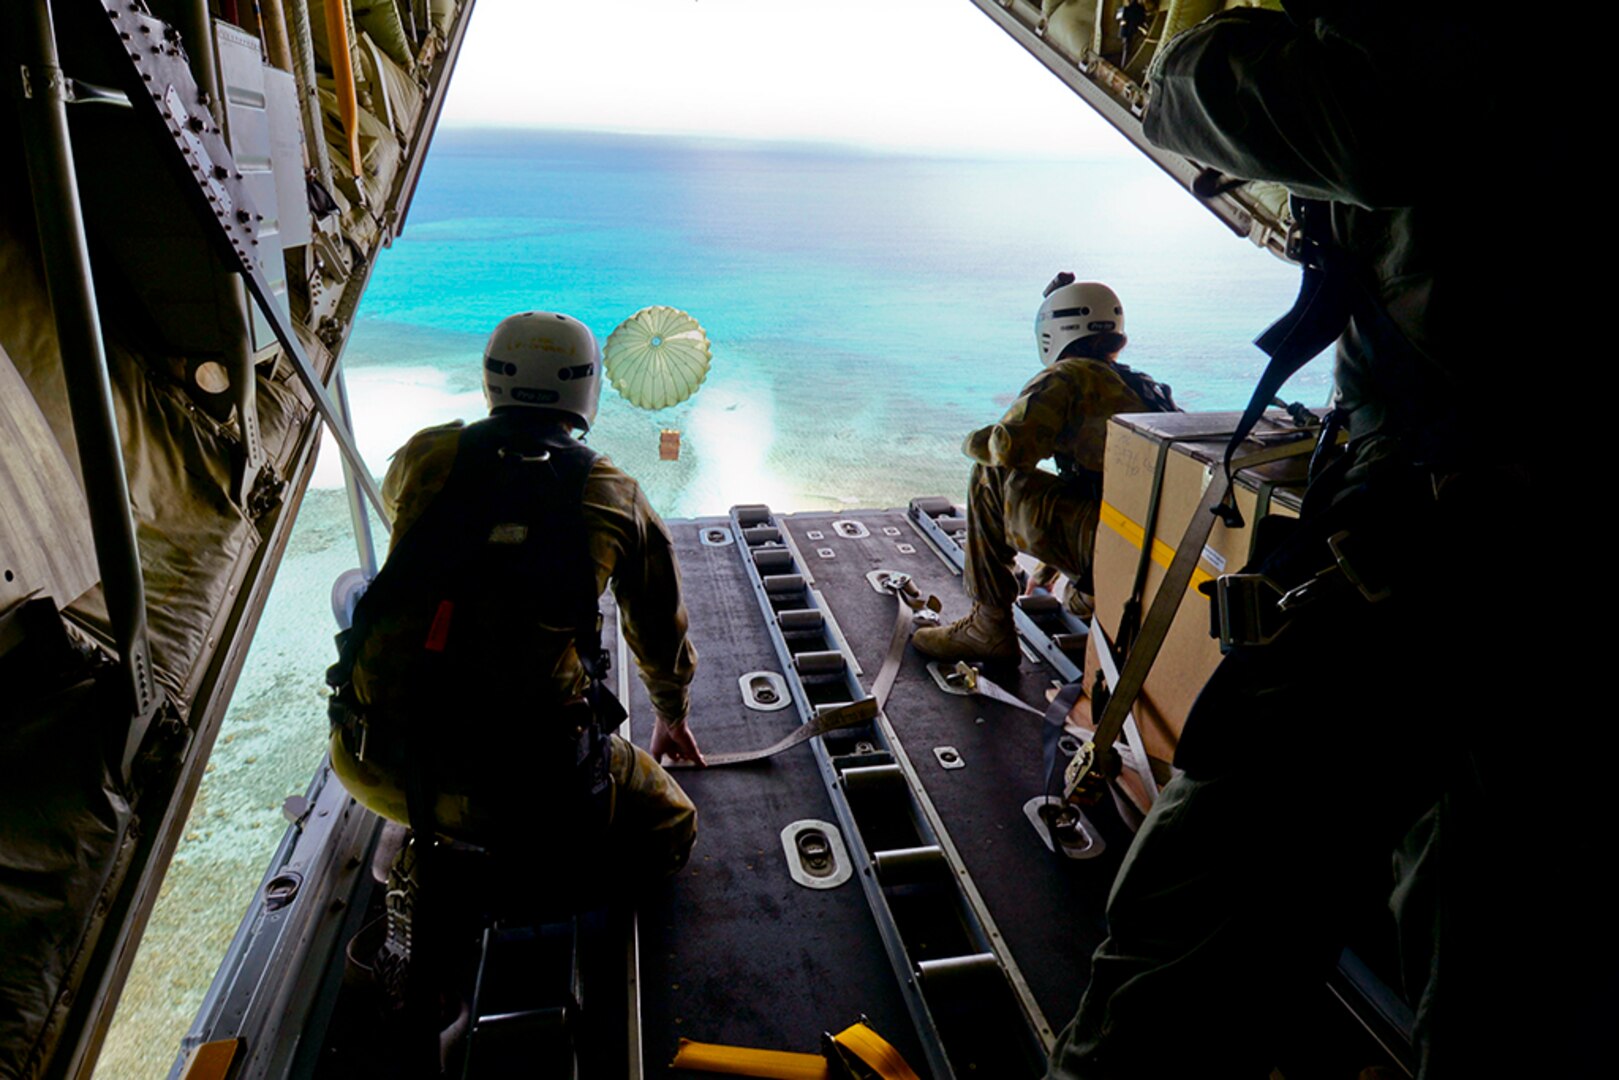 Cpl. Teome Matamua and Sgt. Phillip McIllvaney, Australian Army 176th Air Dispatch Squadron loadmasters, deliver the first low-cost, low-altitude bundle of Operation Christmas Drop 2015 to the island of MogMog, Dec. 8, 2015. Australian and Japanese C-130 aircrews for the first time joined U.S. Airmen during the 64th year of Operation Christmas Drop – a Humanitarian Aid/Disaster Relief training event where C-130 aircrews perform LCLA airdrops on unsurveyed drop zones while providing critical supplies to 56 islands throughout the Commonwealth of the Northern Marianas, Federated States of Micronesia and Republic of Palau. It highlights the U.S. and allied airpower capabilities to orient and respond to activities in peacetime and crisis. 